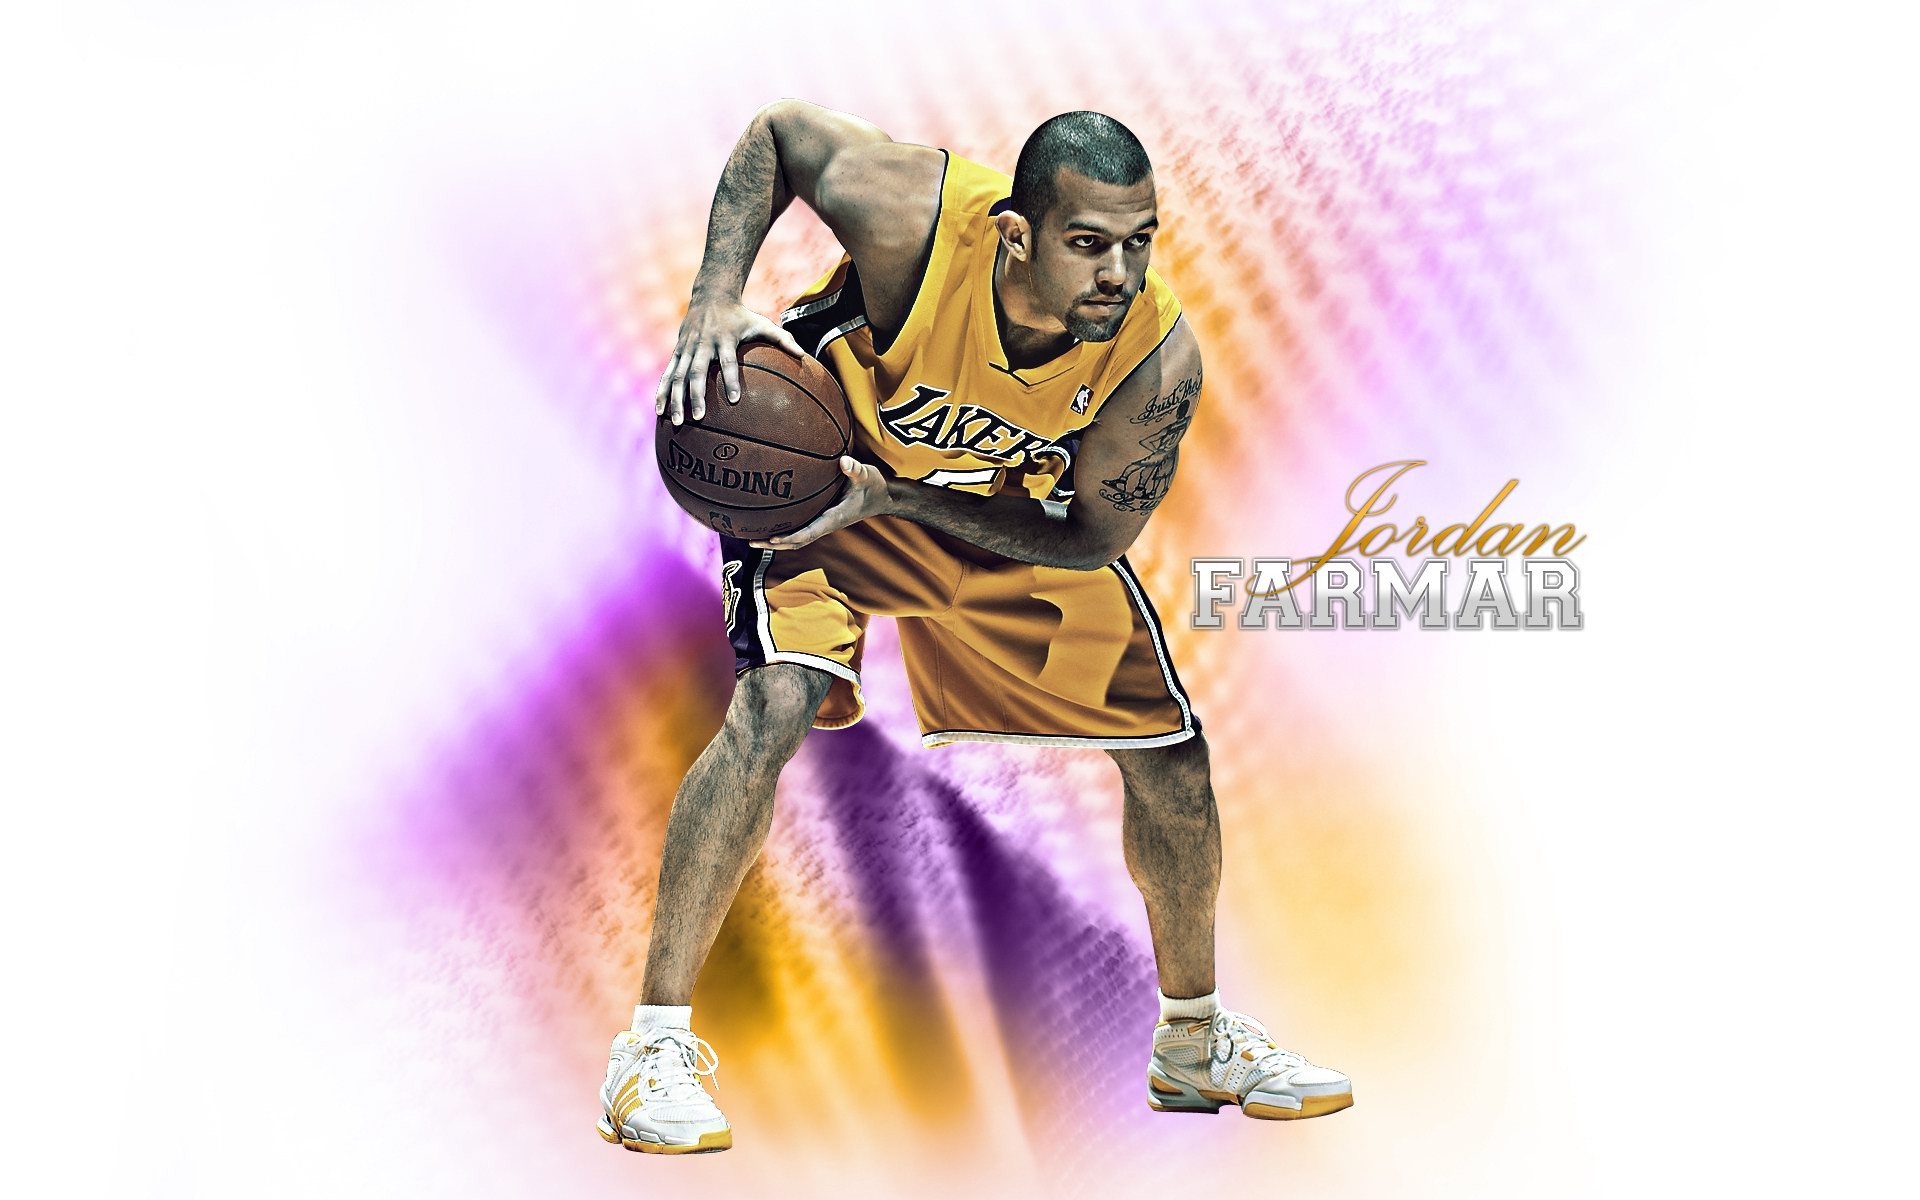 Los Angeles Lakers Wallpaper Oficial #11 - 1920x1200